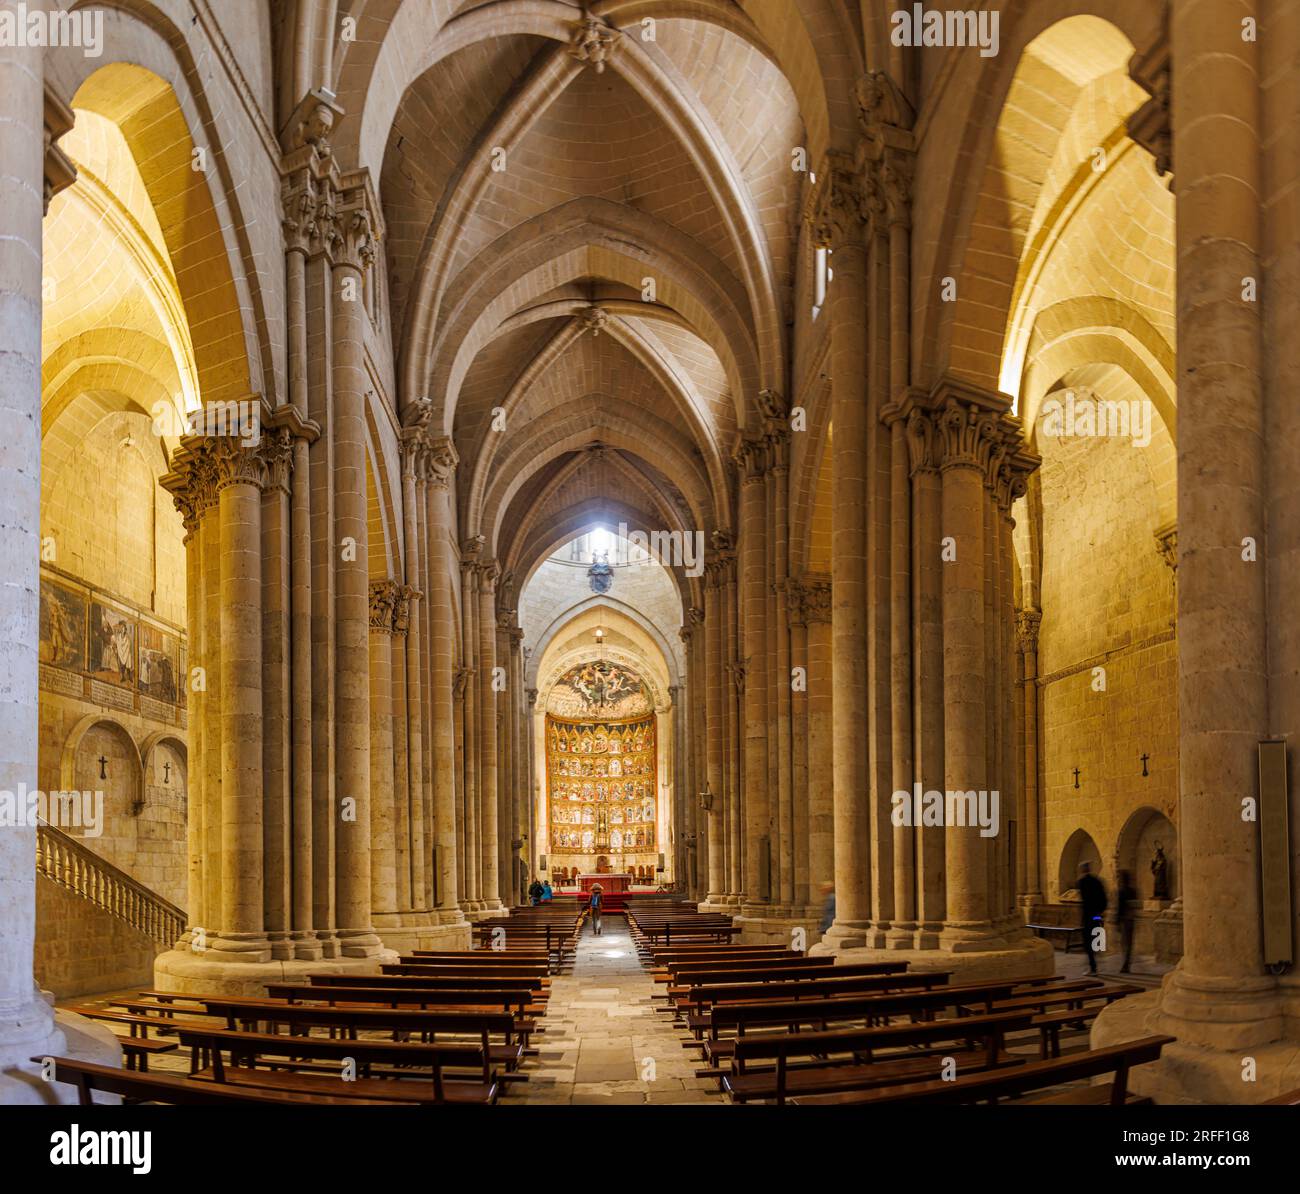 Spain, Castile and Leon, Salamanca, Old city of Salamanca listed as World Heritage by UNESCO, the Old Cathedral, the nave Stock Photo